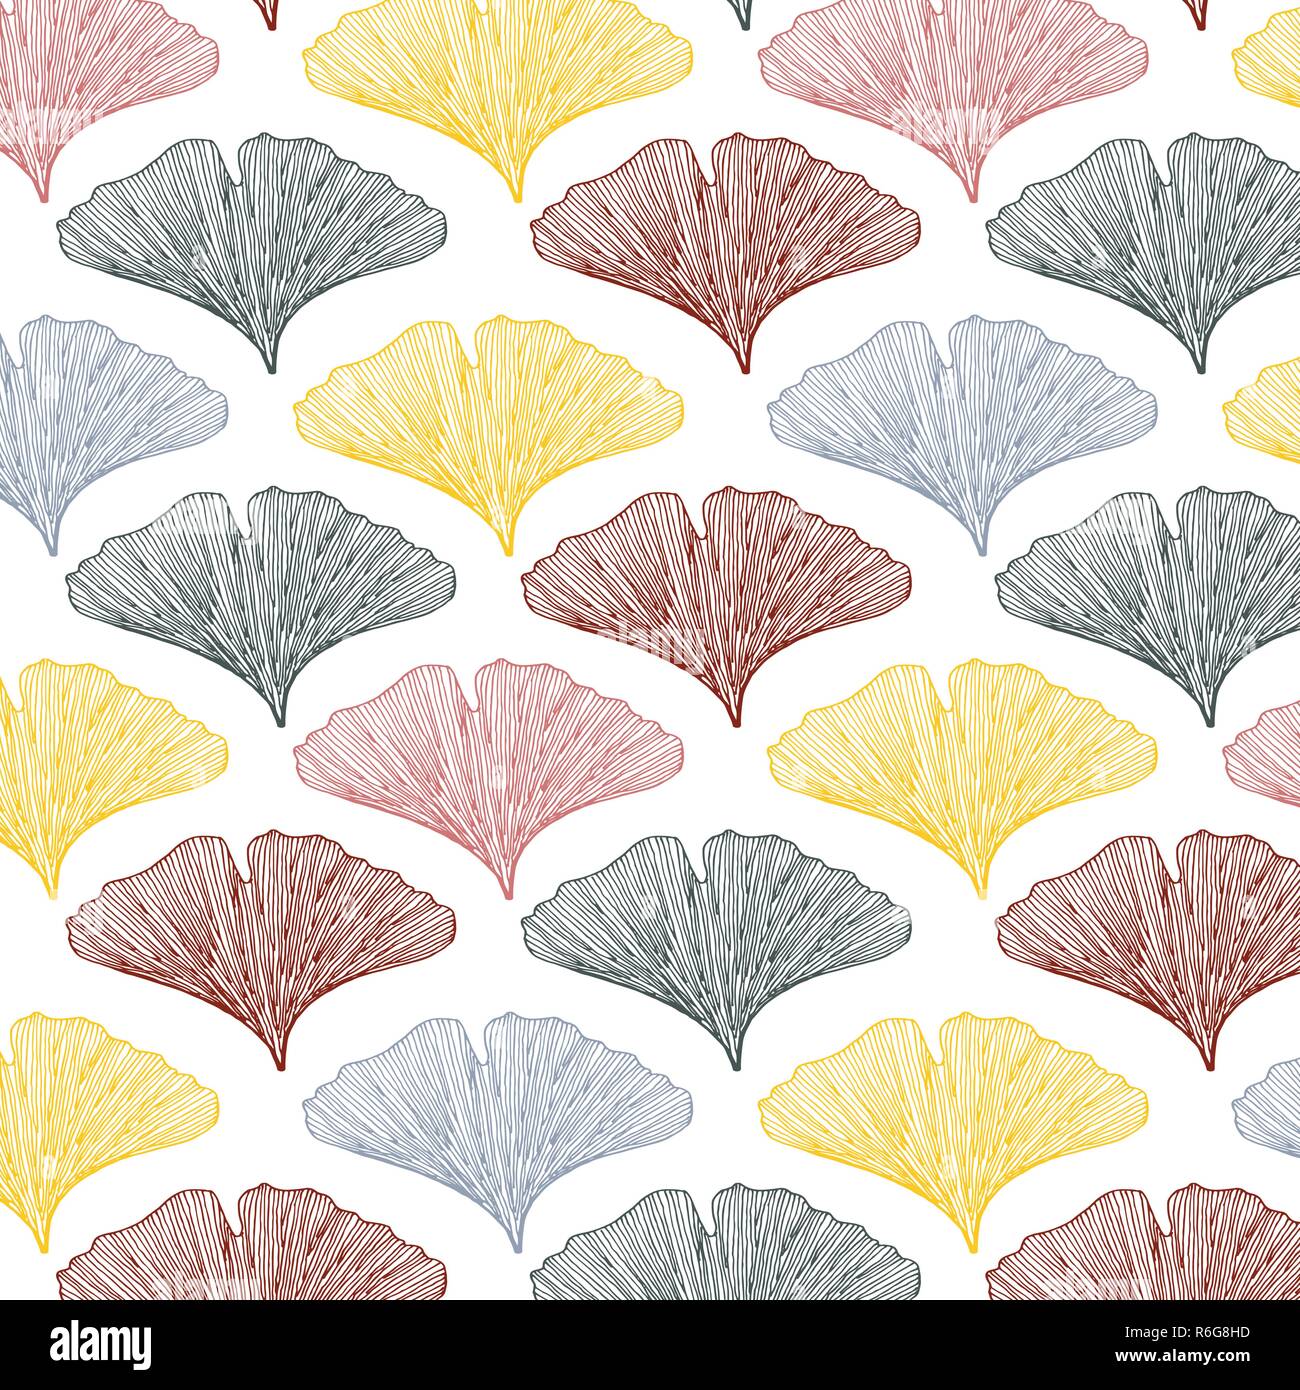 Hand drawn textured ginkgo leaves vector pattern in a pink, red, yellow and gray color palette Stock Vector